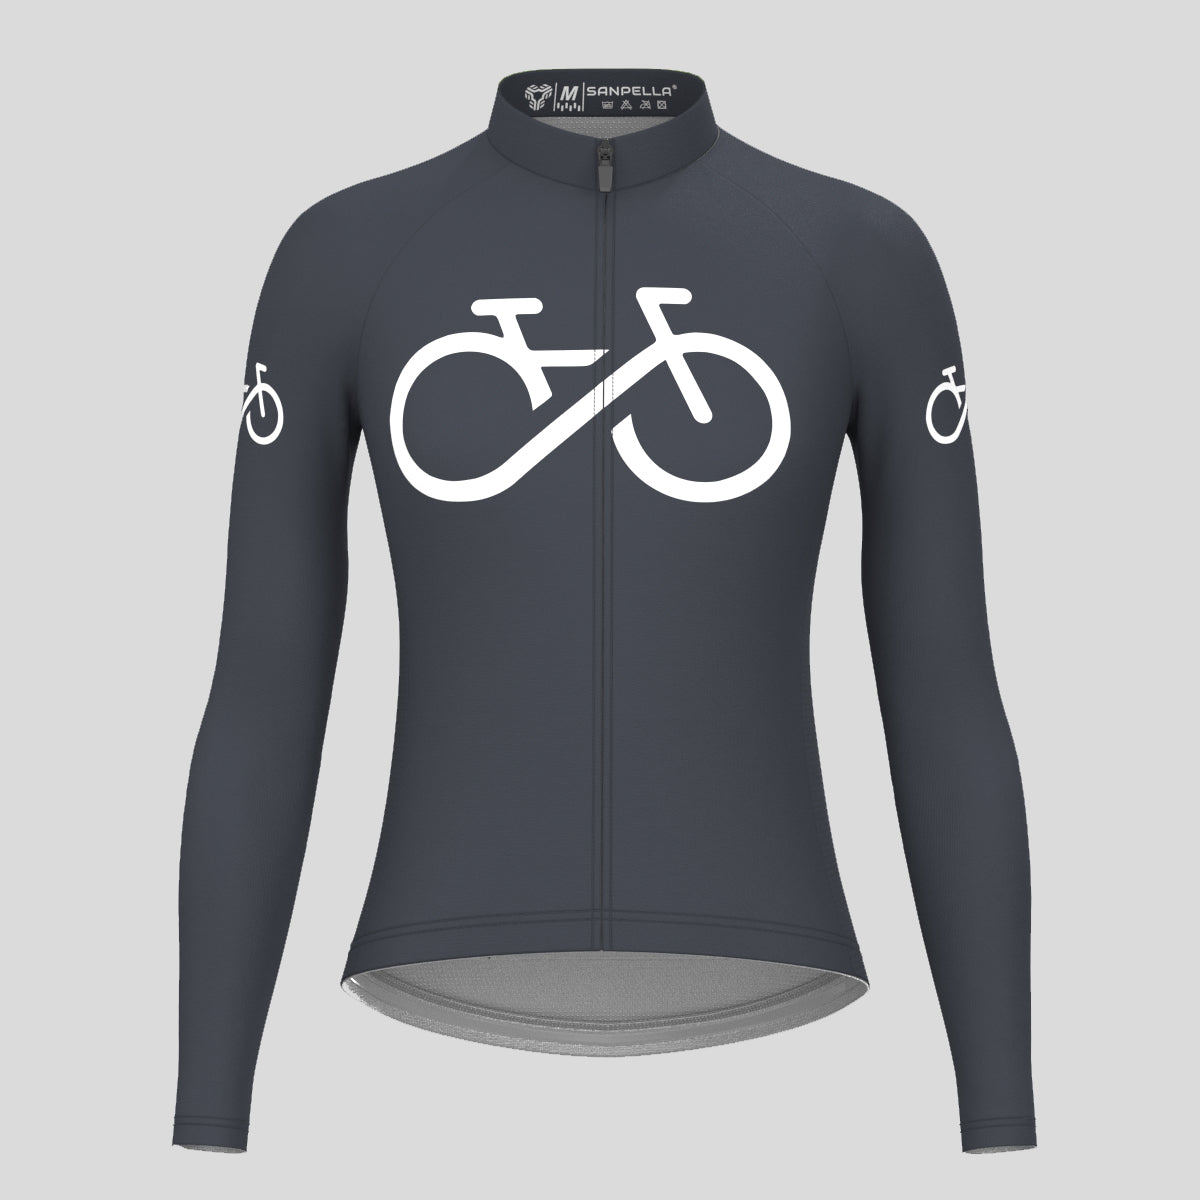 Bike Forever Women's LS Cycling Jersey - Graphite